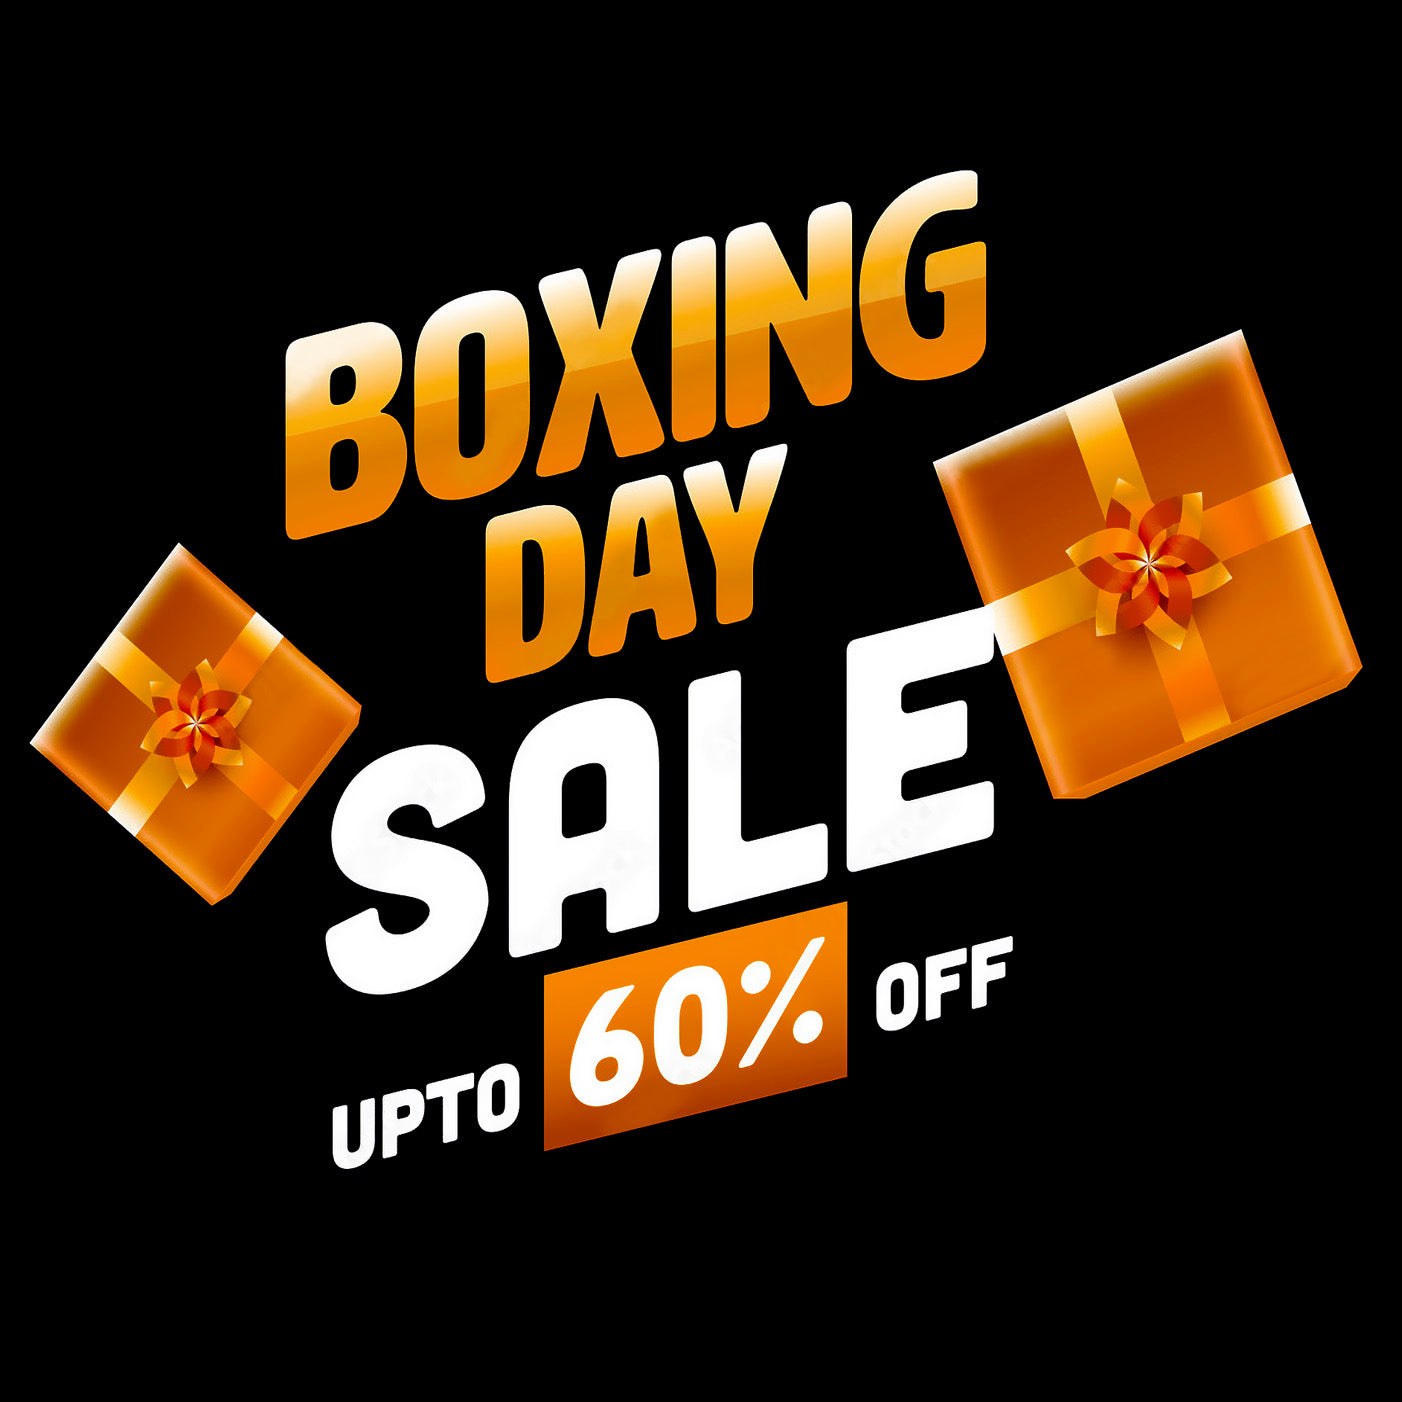 BOXING DAY - ALL SALE